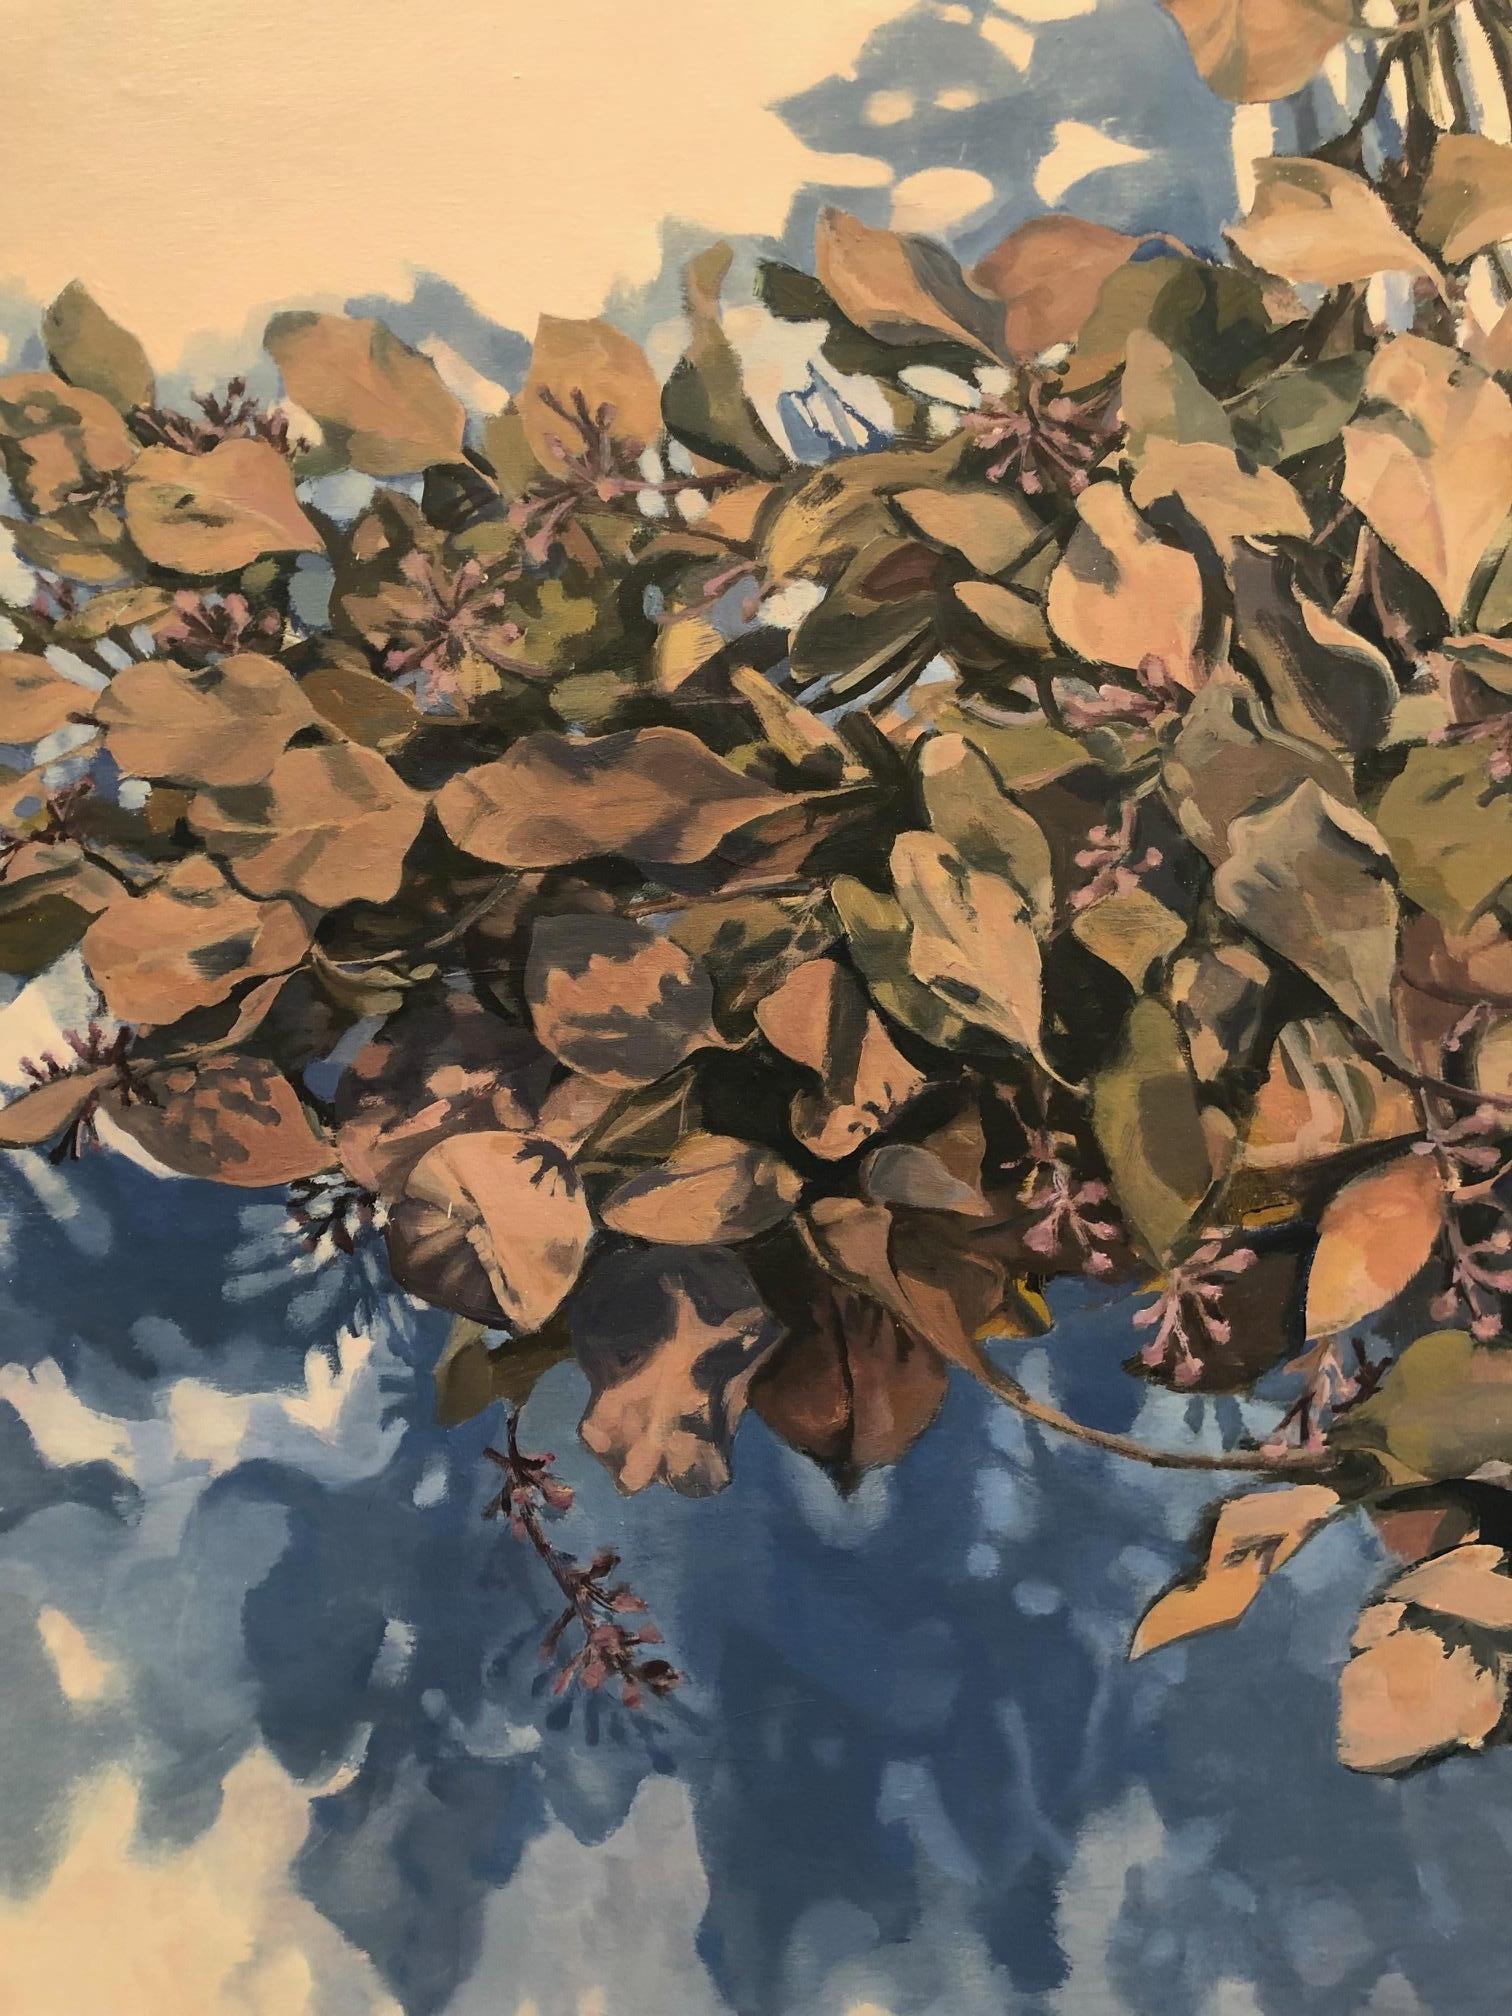 Dawnlight / eucalyptus leaves - A natural abstraction through applied realism - Painting by Stephanie Peek